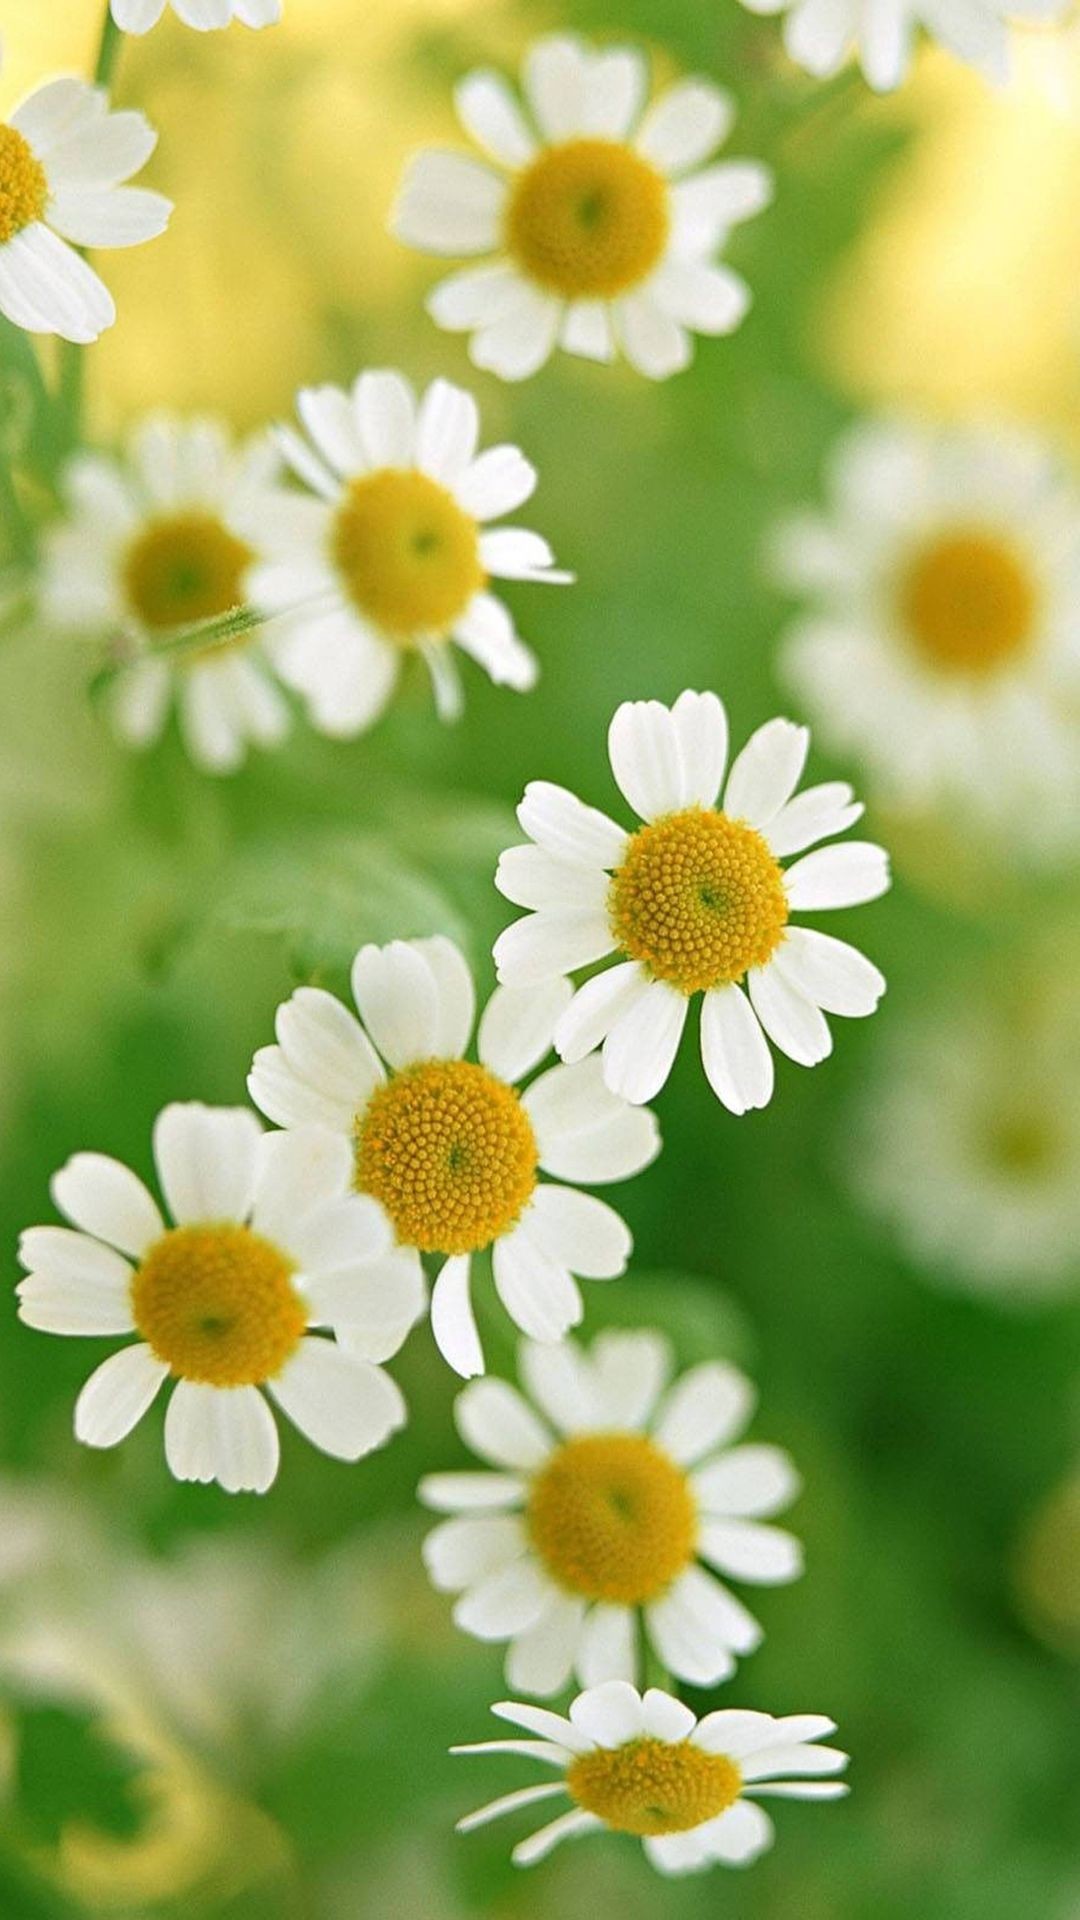 Daisies, White Flowers, Flowers Wallpapers Hd / Desktop - Iphone Wallpaper Daisy Flower , HD Wallpaper & Backgrounds